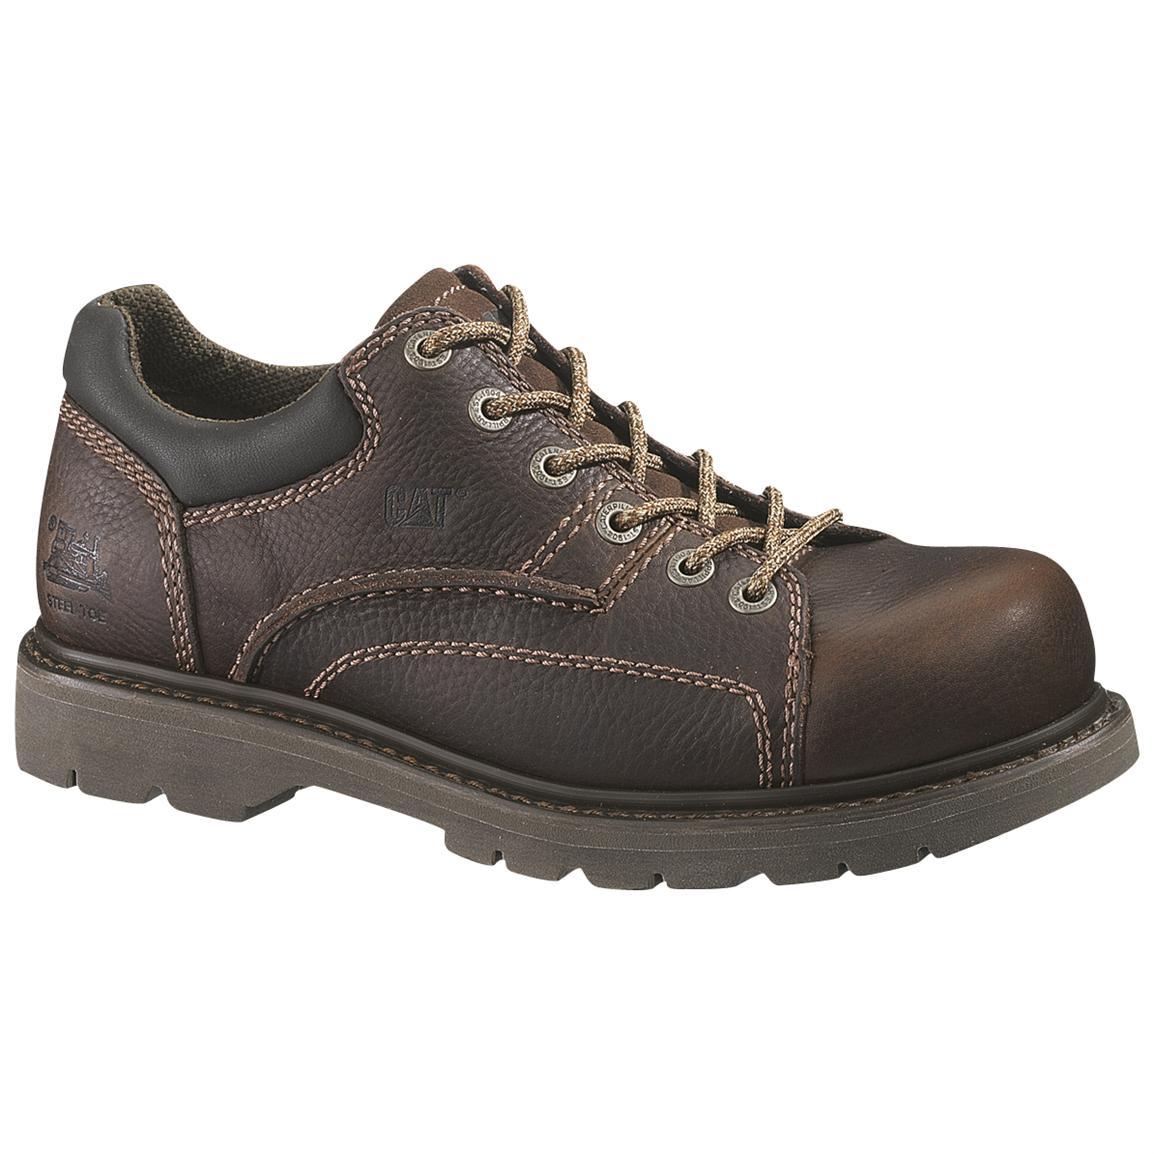 Women's CAT® Blackbriar Steel Toe Work Shoes - 195616, Work Boots at